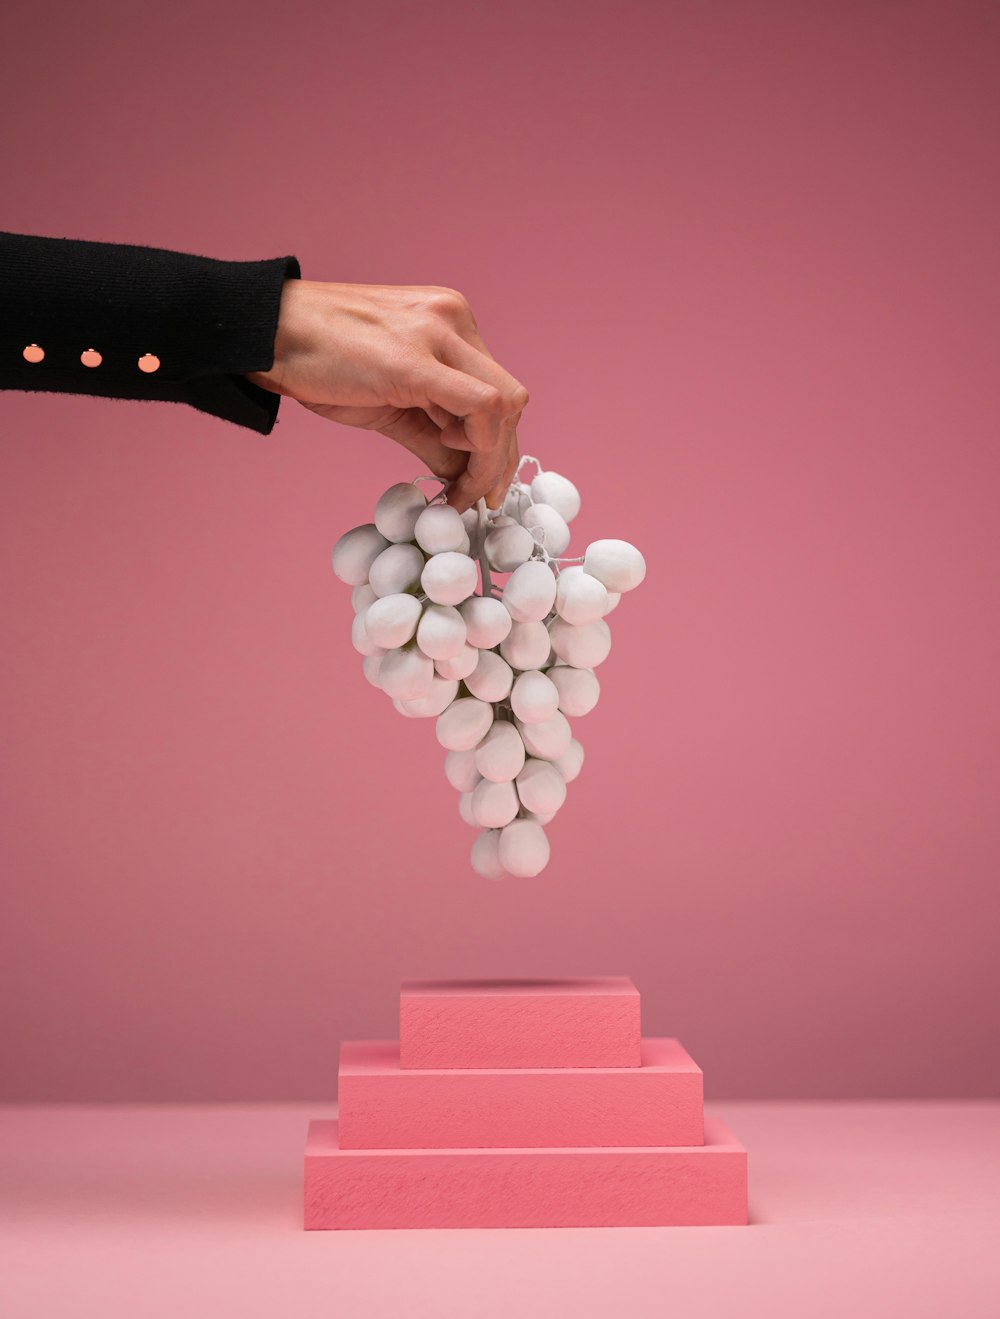 a person holding a bunch of white balls in their hand